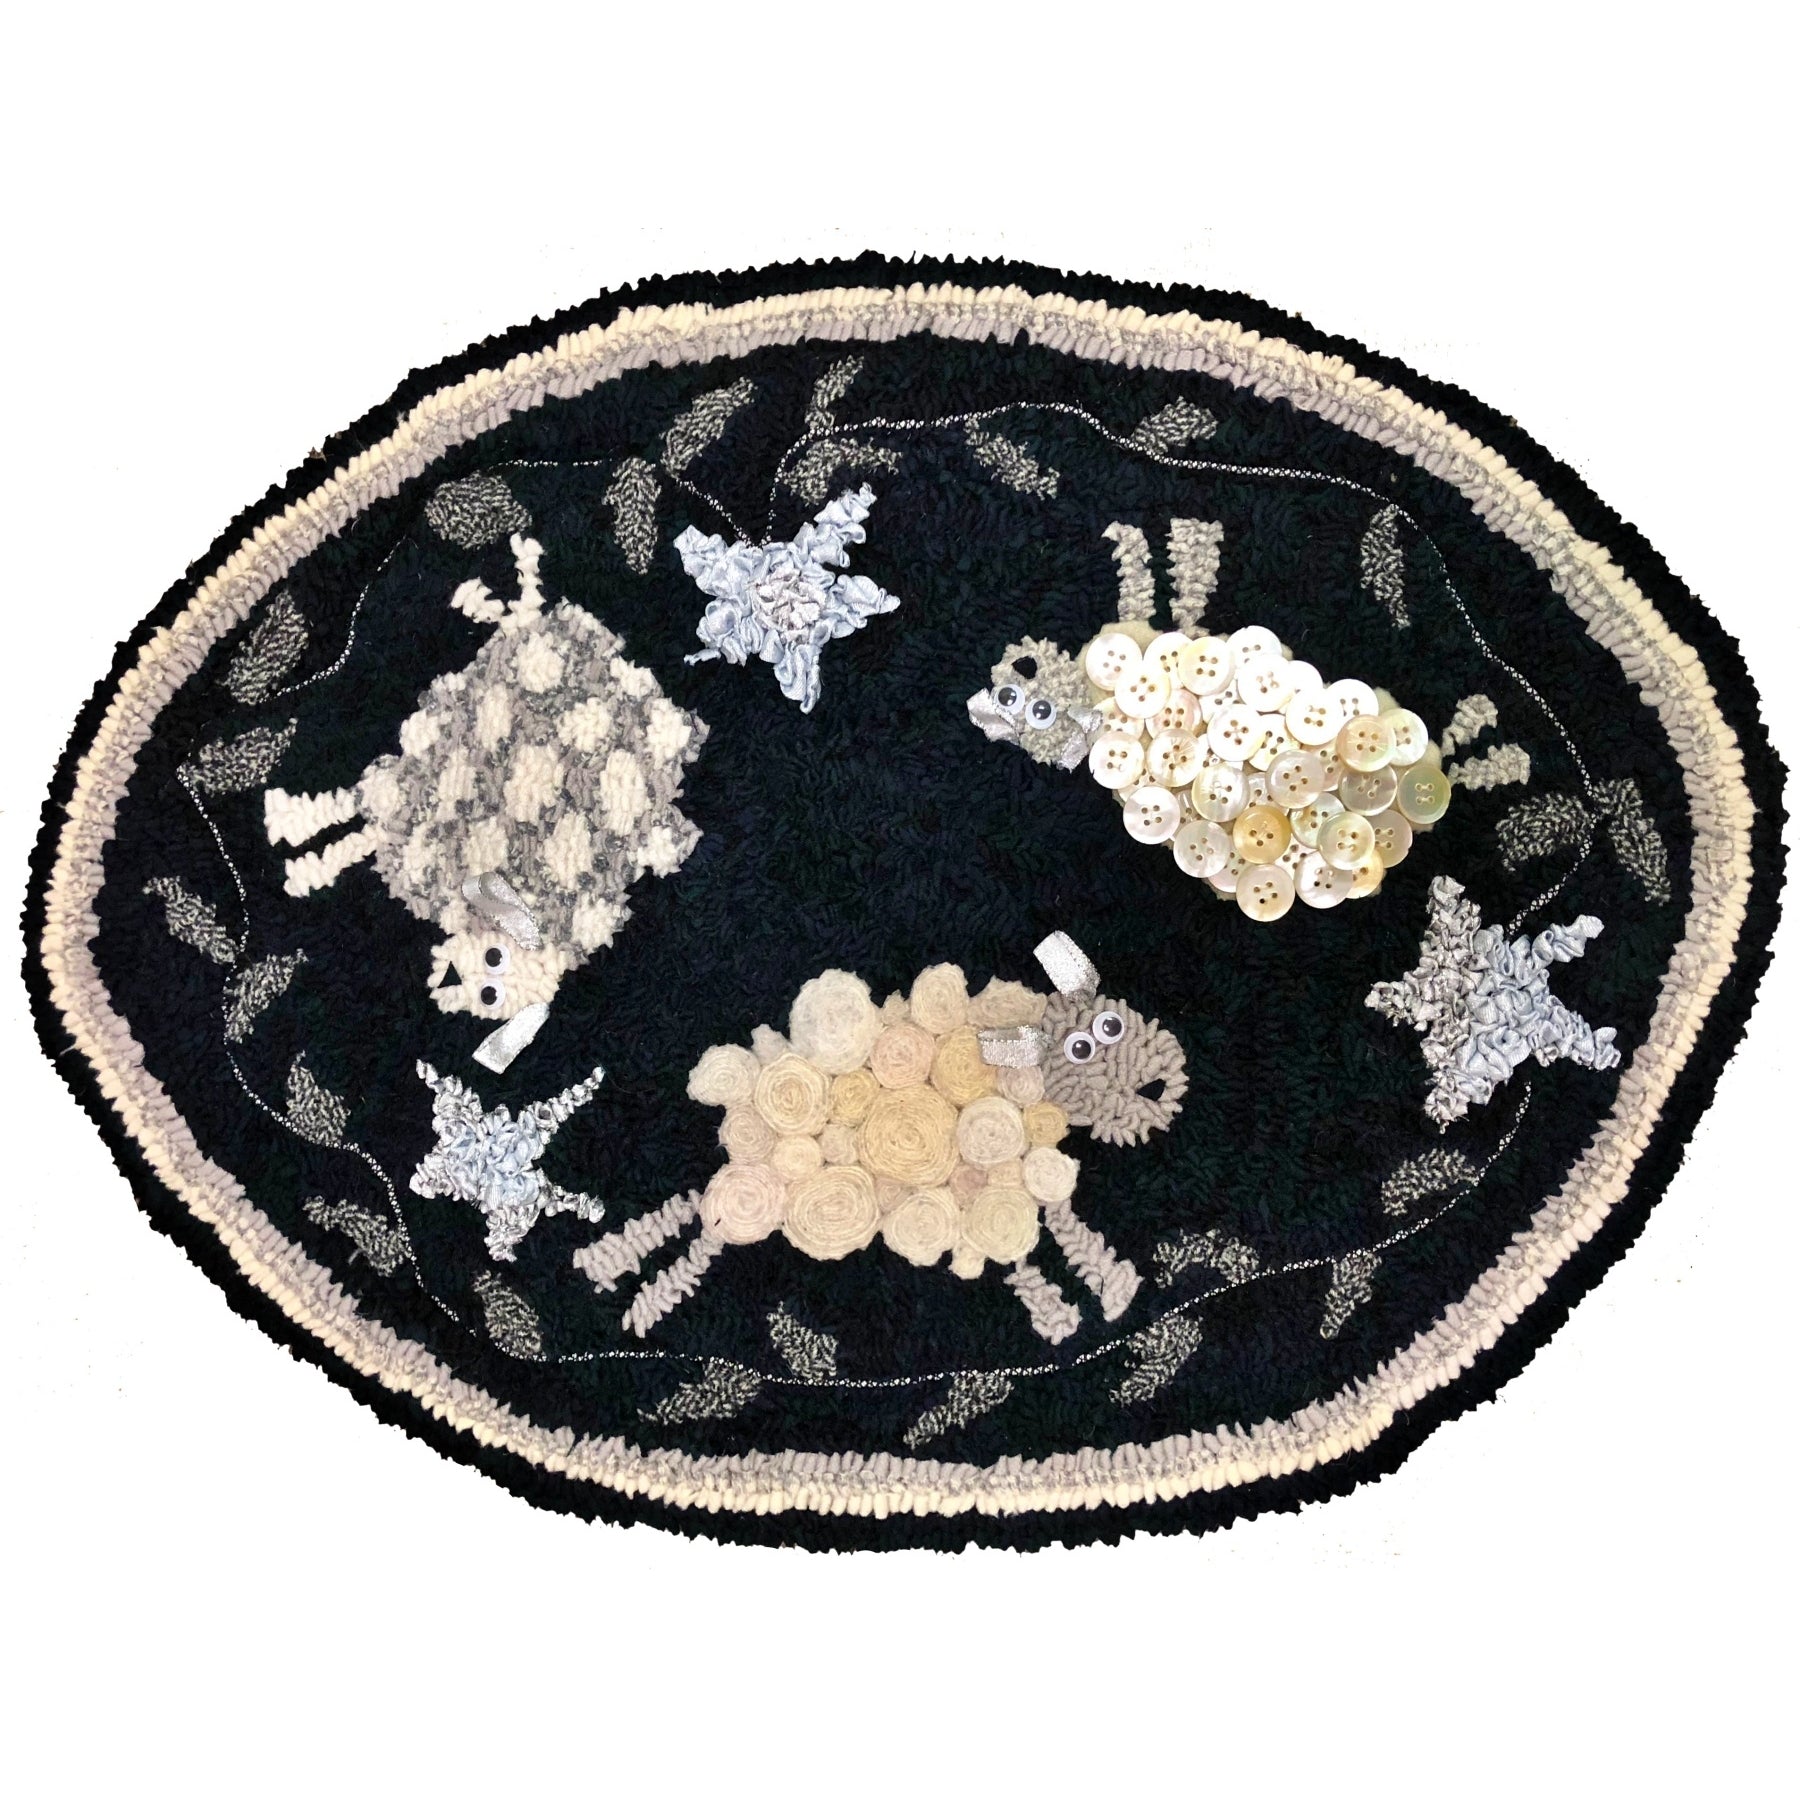 Counting Oval Sheep, rug hooked by Melissa Pattacini